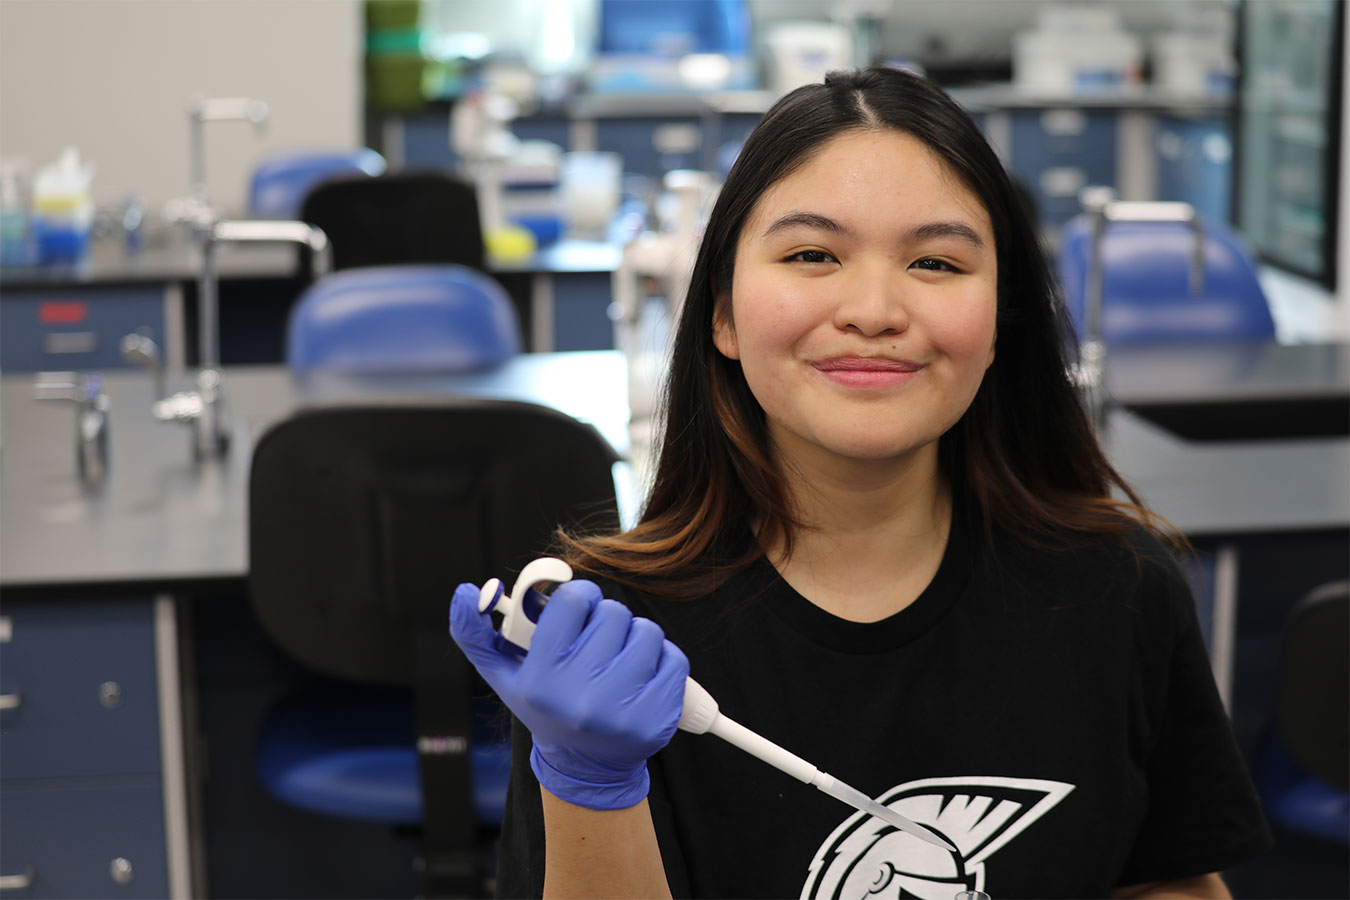 Denyce Bravo holding a pipette in the biology lab at DSU.